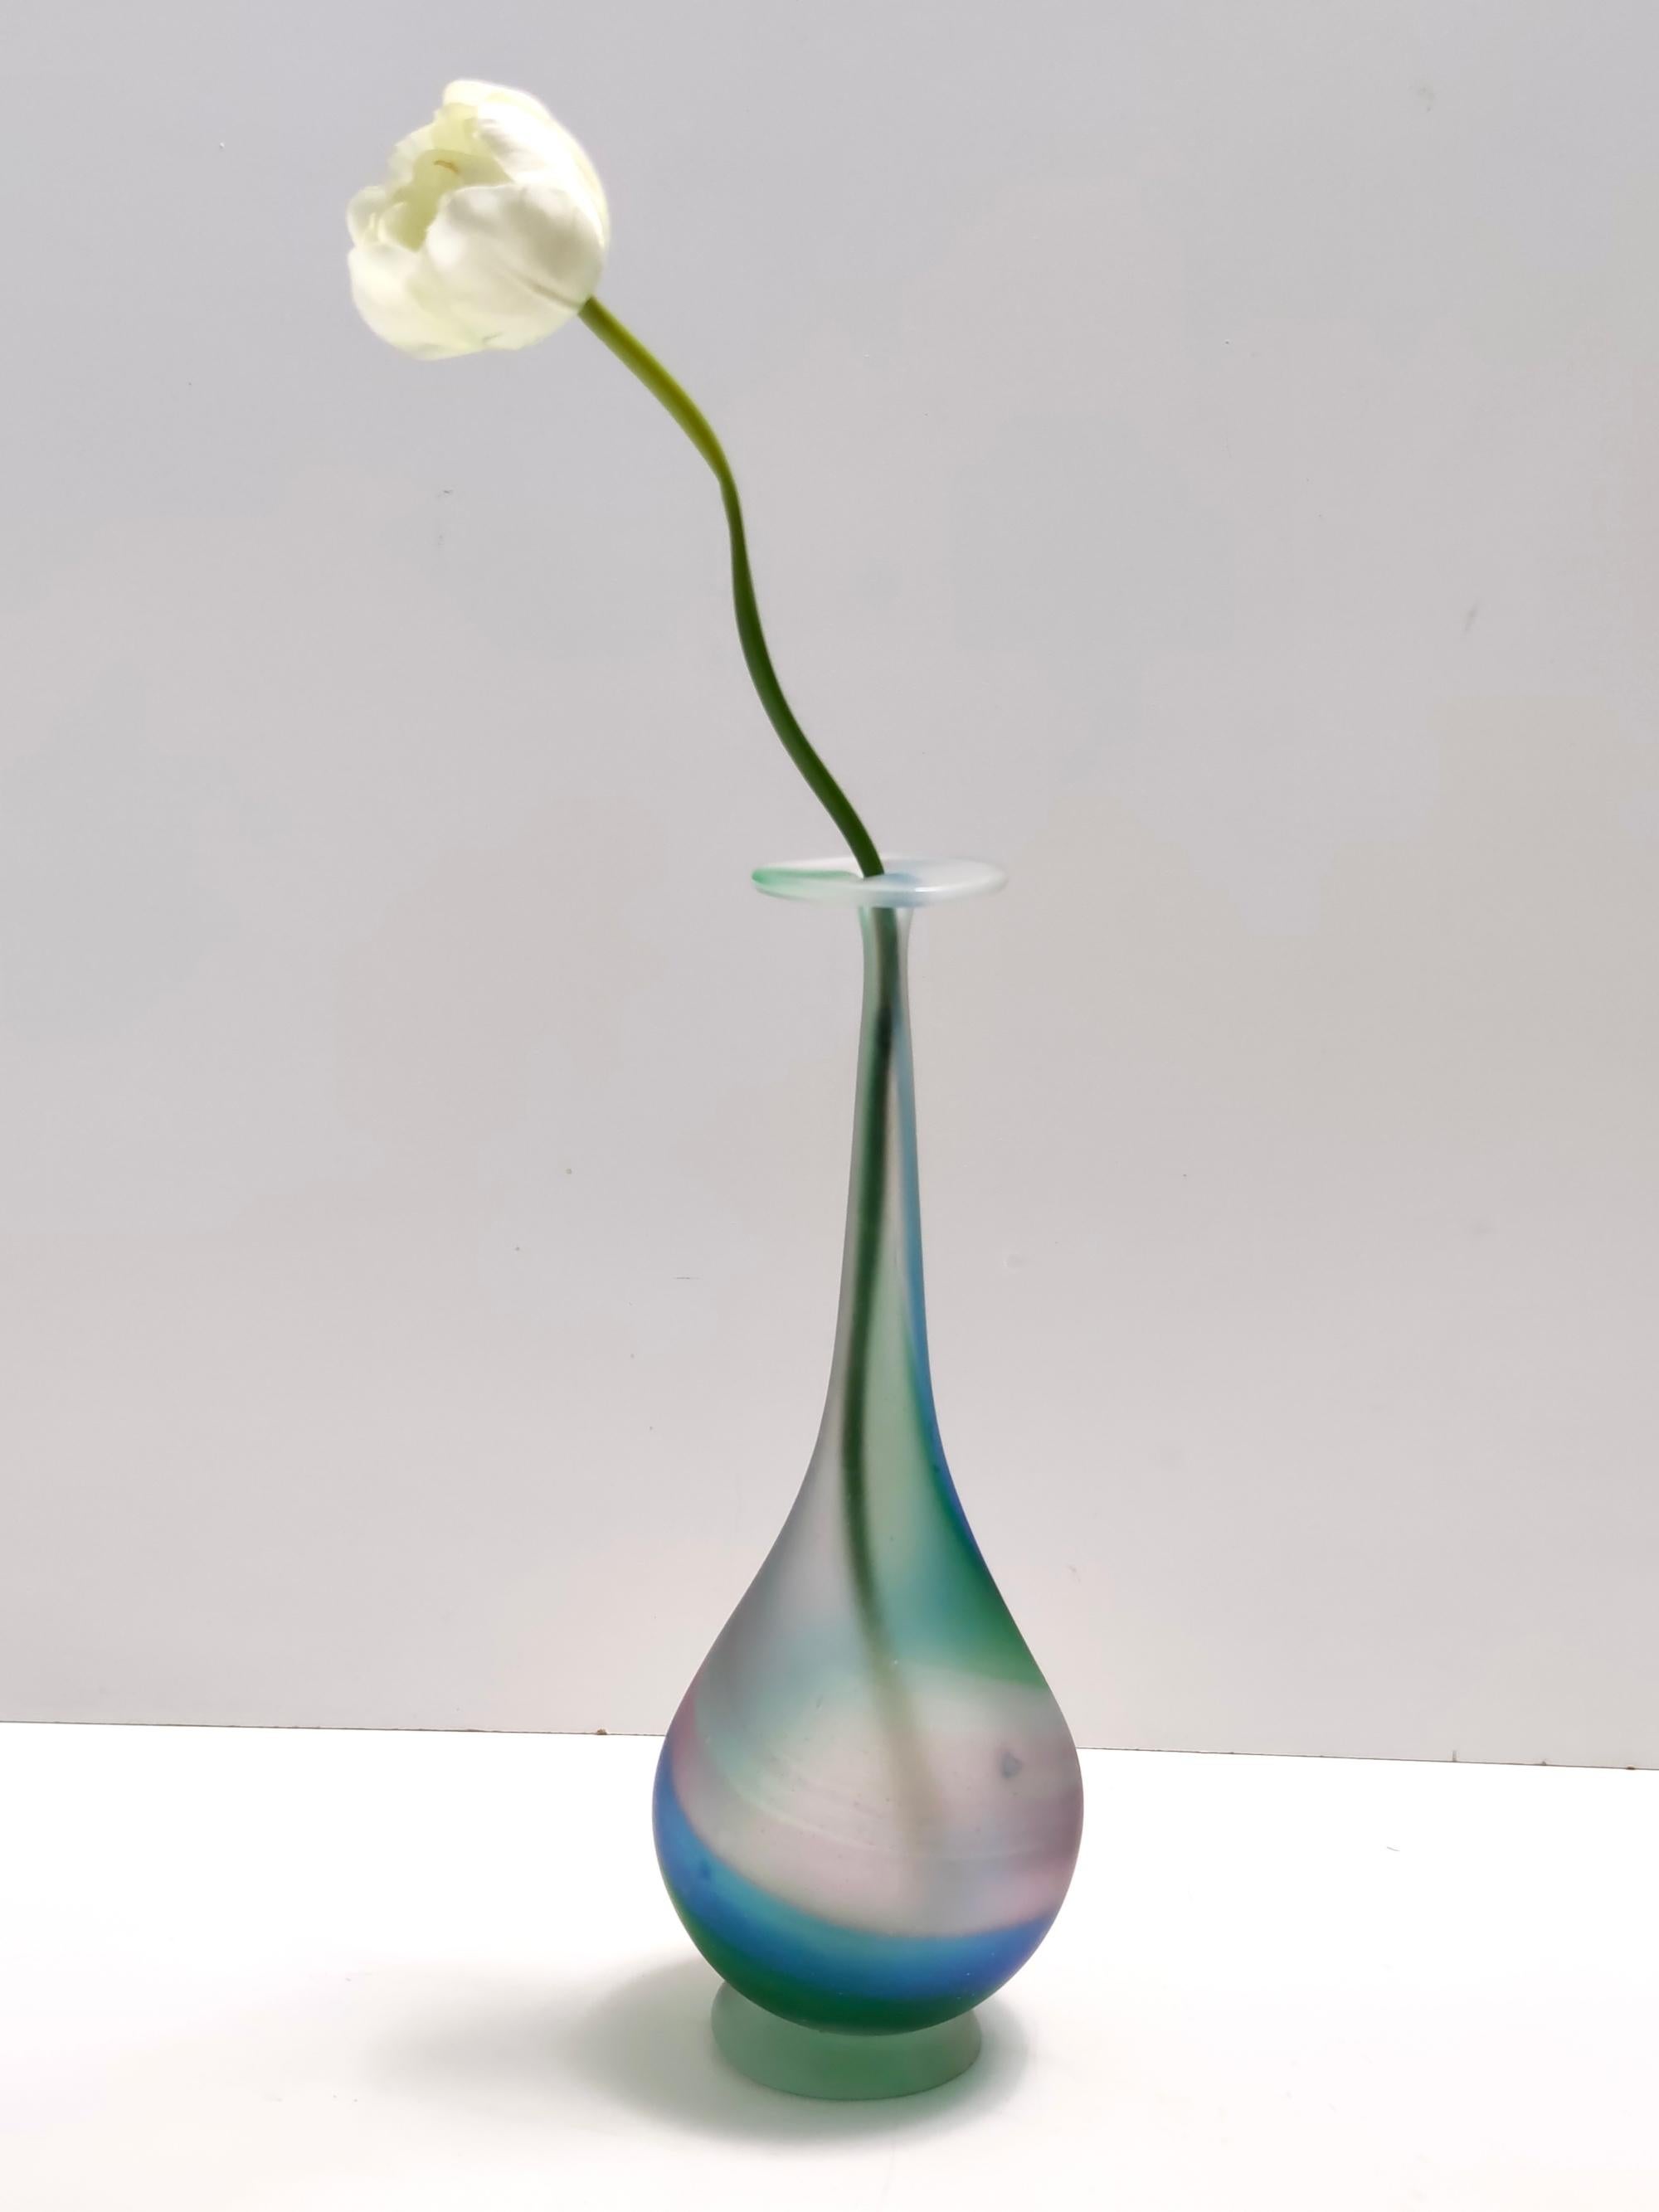 Made in Italy, 1970s. 
The tag refers to La Rinascente, a historic luxury department store based in Piazza Duomo in Milan: the most important Italian architects and designers worked for it.
The vase is signed and marked Murano, with its original